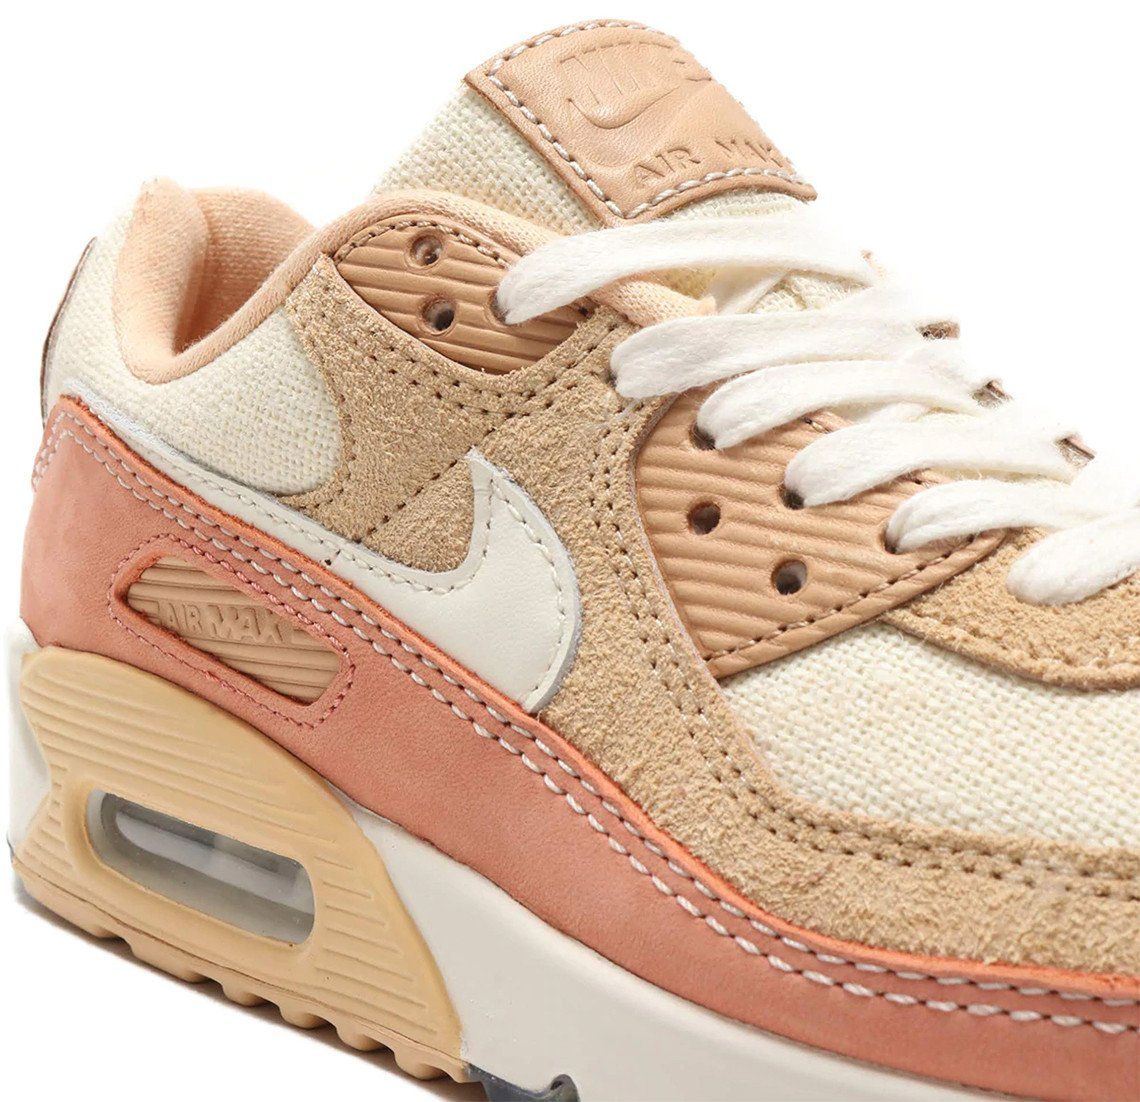 Air Max 90 Cork On Sale, UP TO 55% OFF